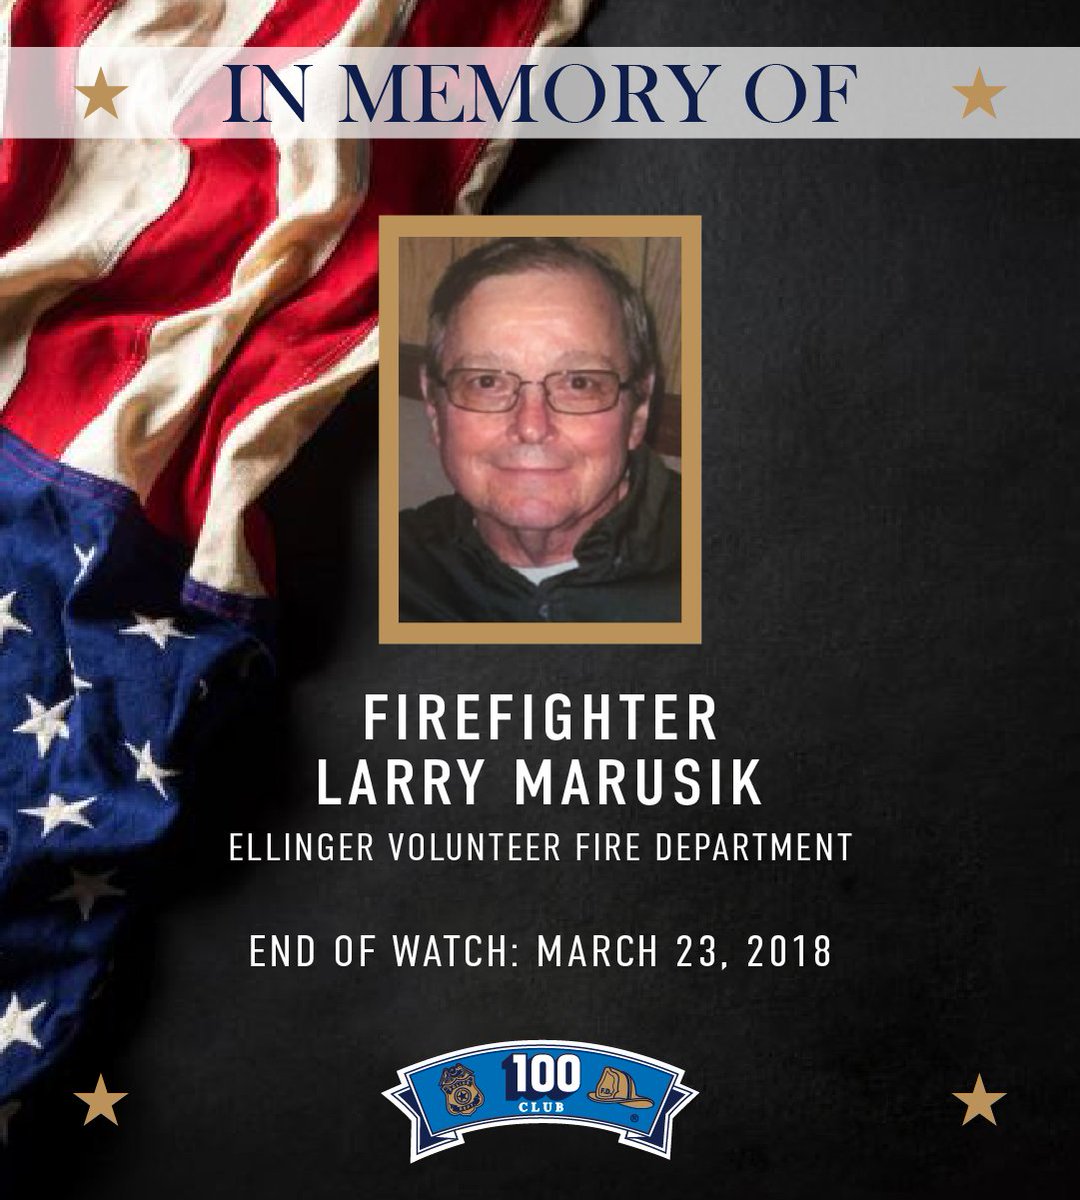 In remembrance of Ellinger Volunteer Fire Department Firefighter Larry Marusik who passed away after succumbing to injuries he sustained 13 days earlier while fighting a fire in the line of duty. #FortheFallen